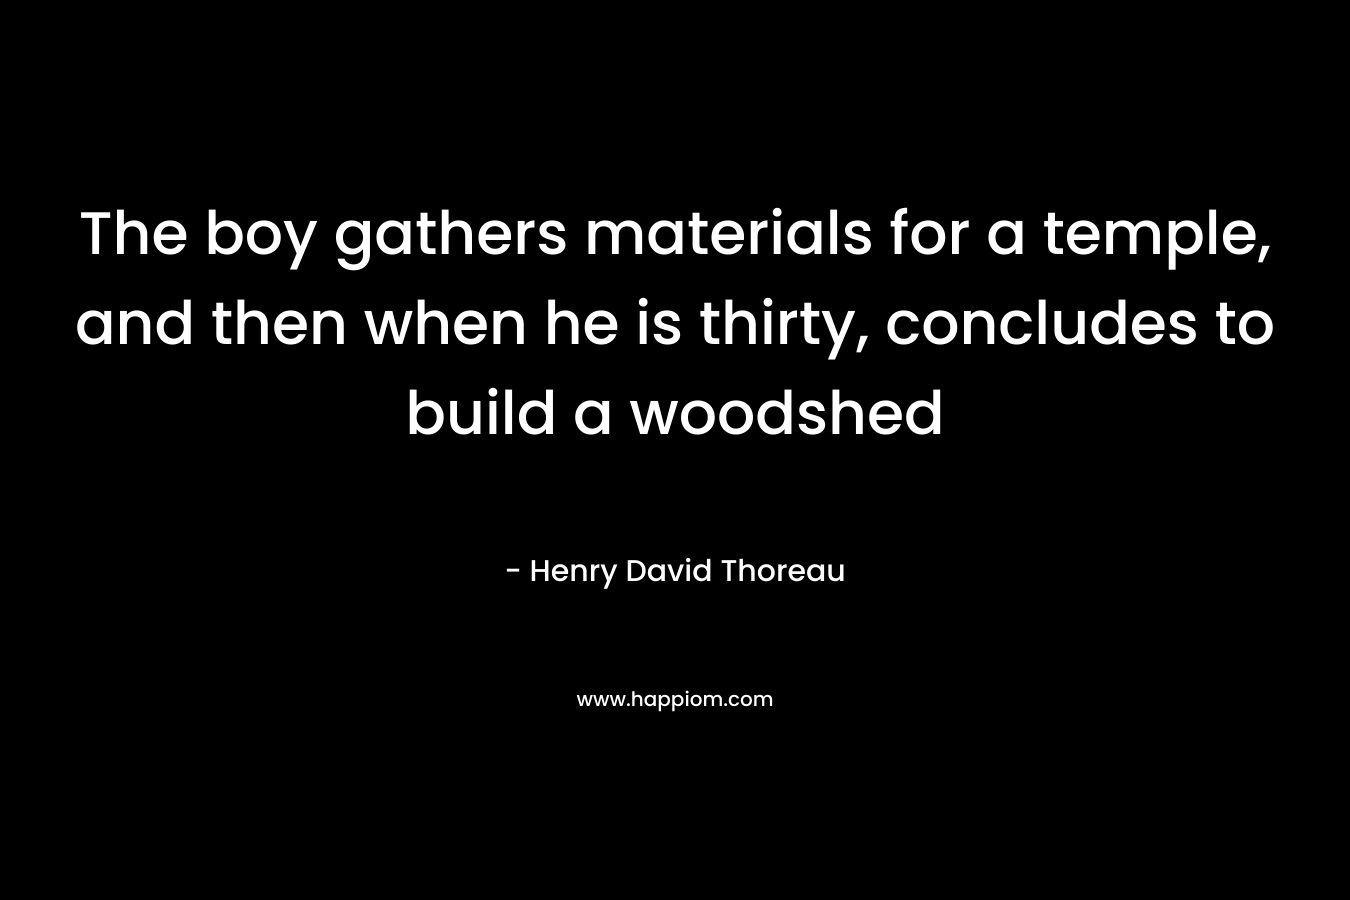 The boy gathers materials for a temple, and then when he is thirty, concludes to build a woodshed – Henry David Thoreau